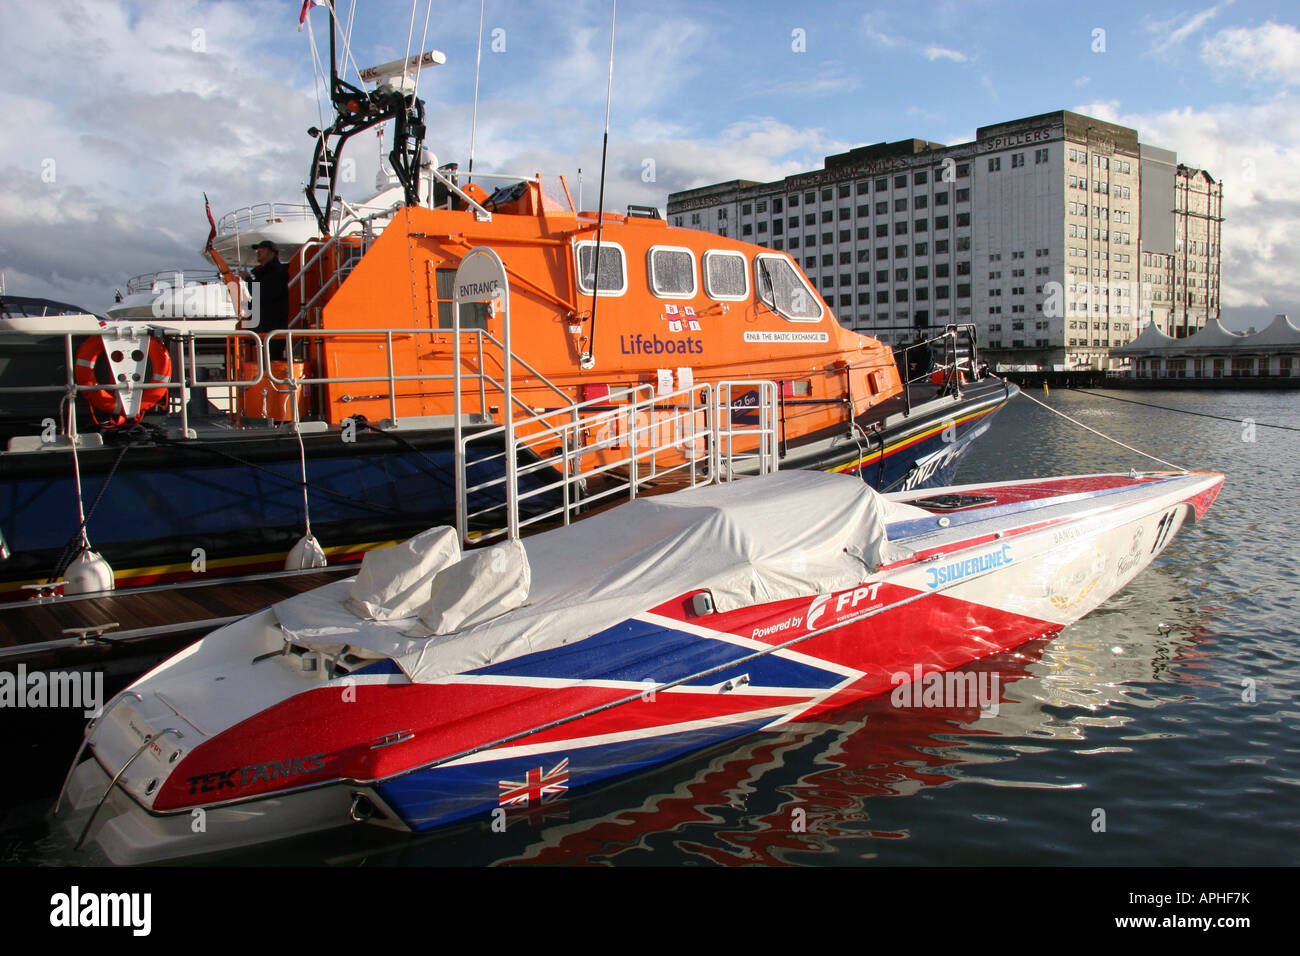 RNLI Lifeboat Tamar class outside in the Royal Victoria dock at the Collins Stewart London Boat Show Excel  London Stock Photo